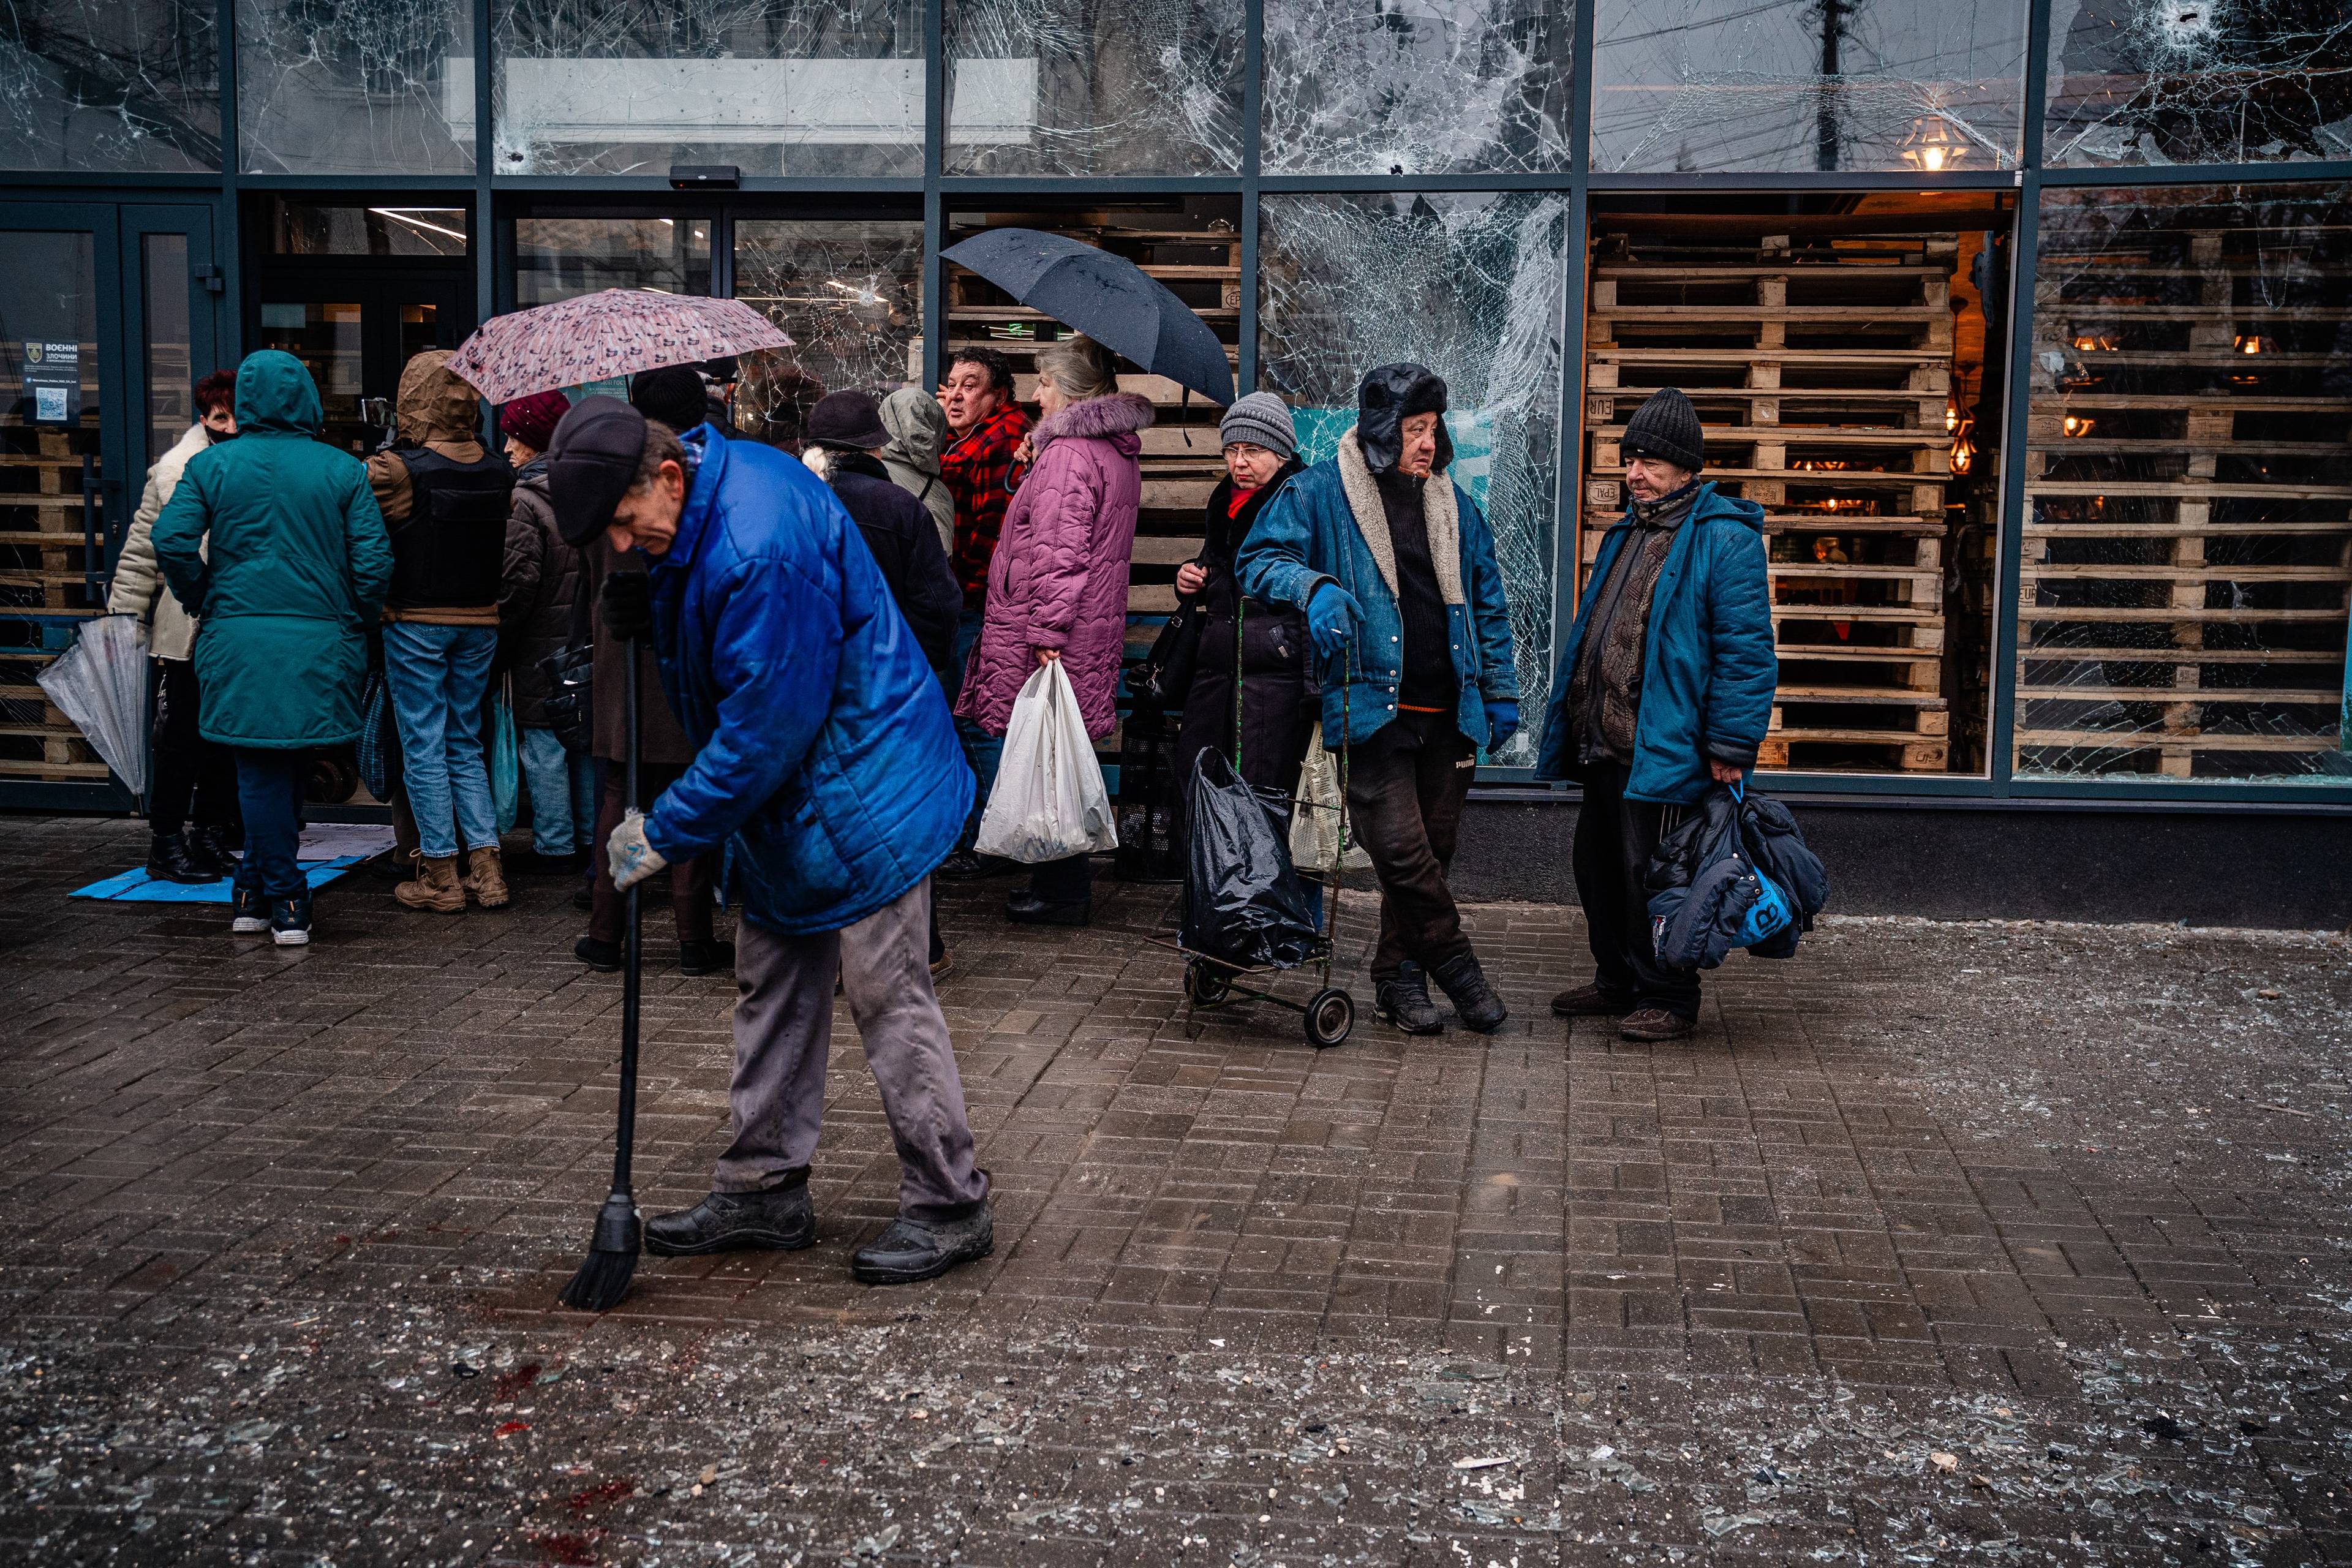 People stand in line outside a supermarket while a man cleans up after shelling on Ukrainian city of Kherson on December 25, 2022, amid the Russian invasion of Ukraine. - Ukrainian President Volodymyr Zelensky blasted Russian "terror" after shelling left 10 dead and 55 injured in Kherson city on December 24, 2022, urging his compatriots to persevere as they observed a Christmas Eve defined by war. (Photo by Dimitar DILKOFF / AFP)